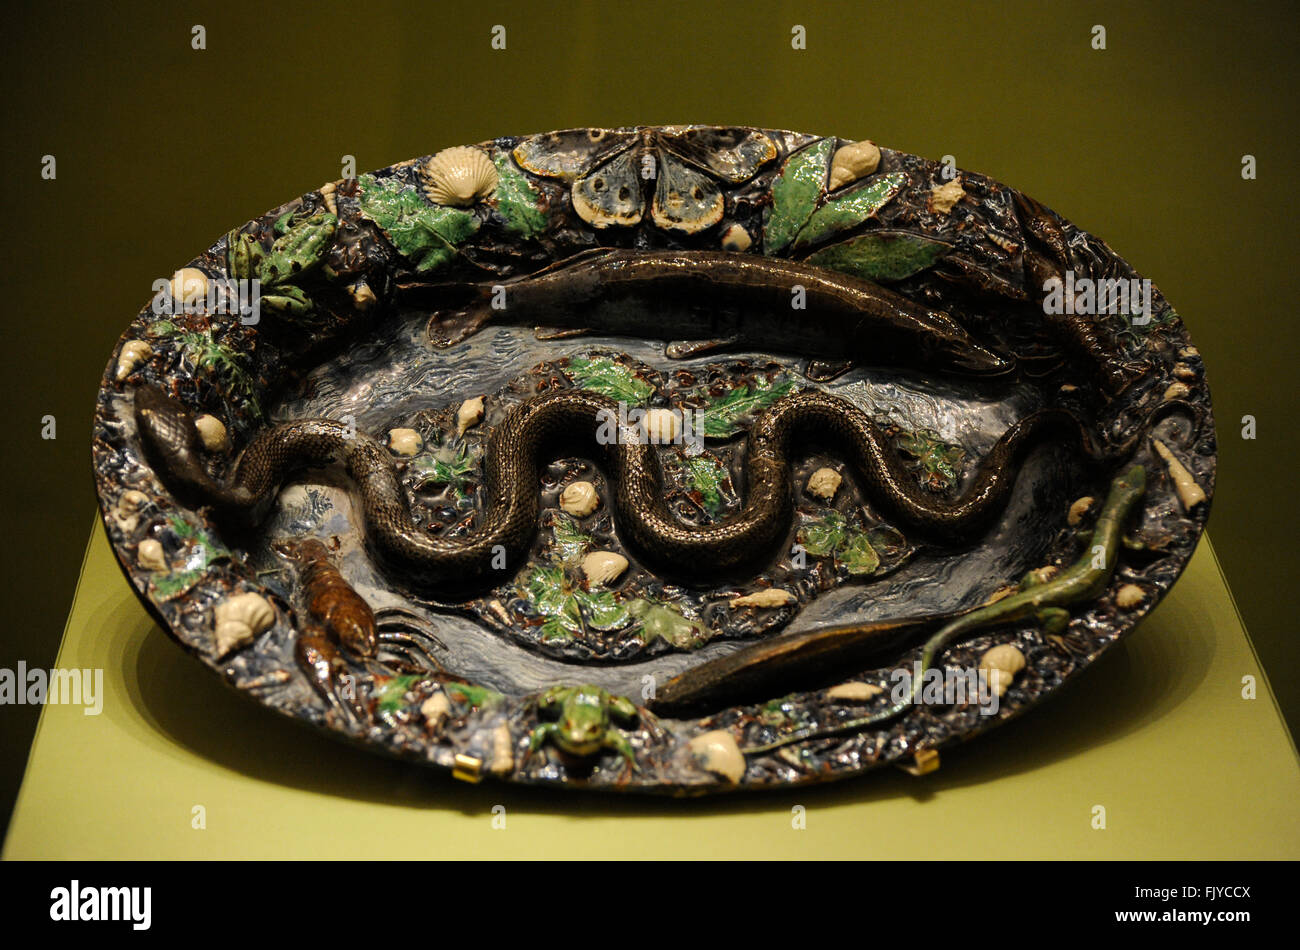 Bernard Palissy (1510-1590). French potter and craftsman. Dish with animal and plant ornaments. Second half of 16th century. The State Hermitage Museum. Saint Petersburg. Russia. Stock Photo